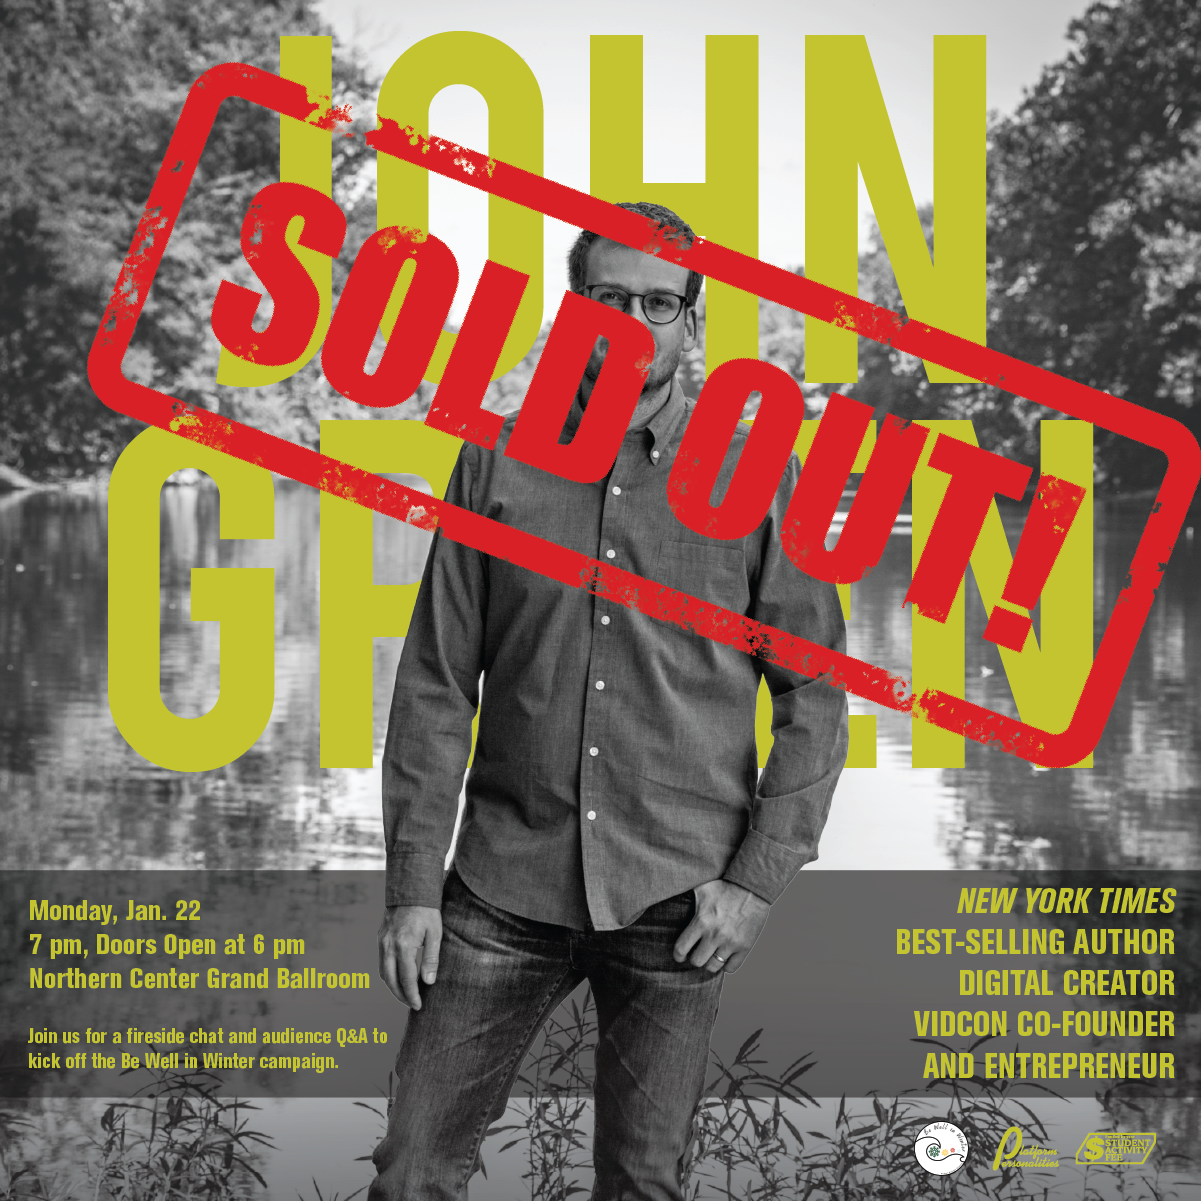 John+Green+to+speak+at+sold+out+event